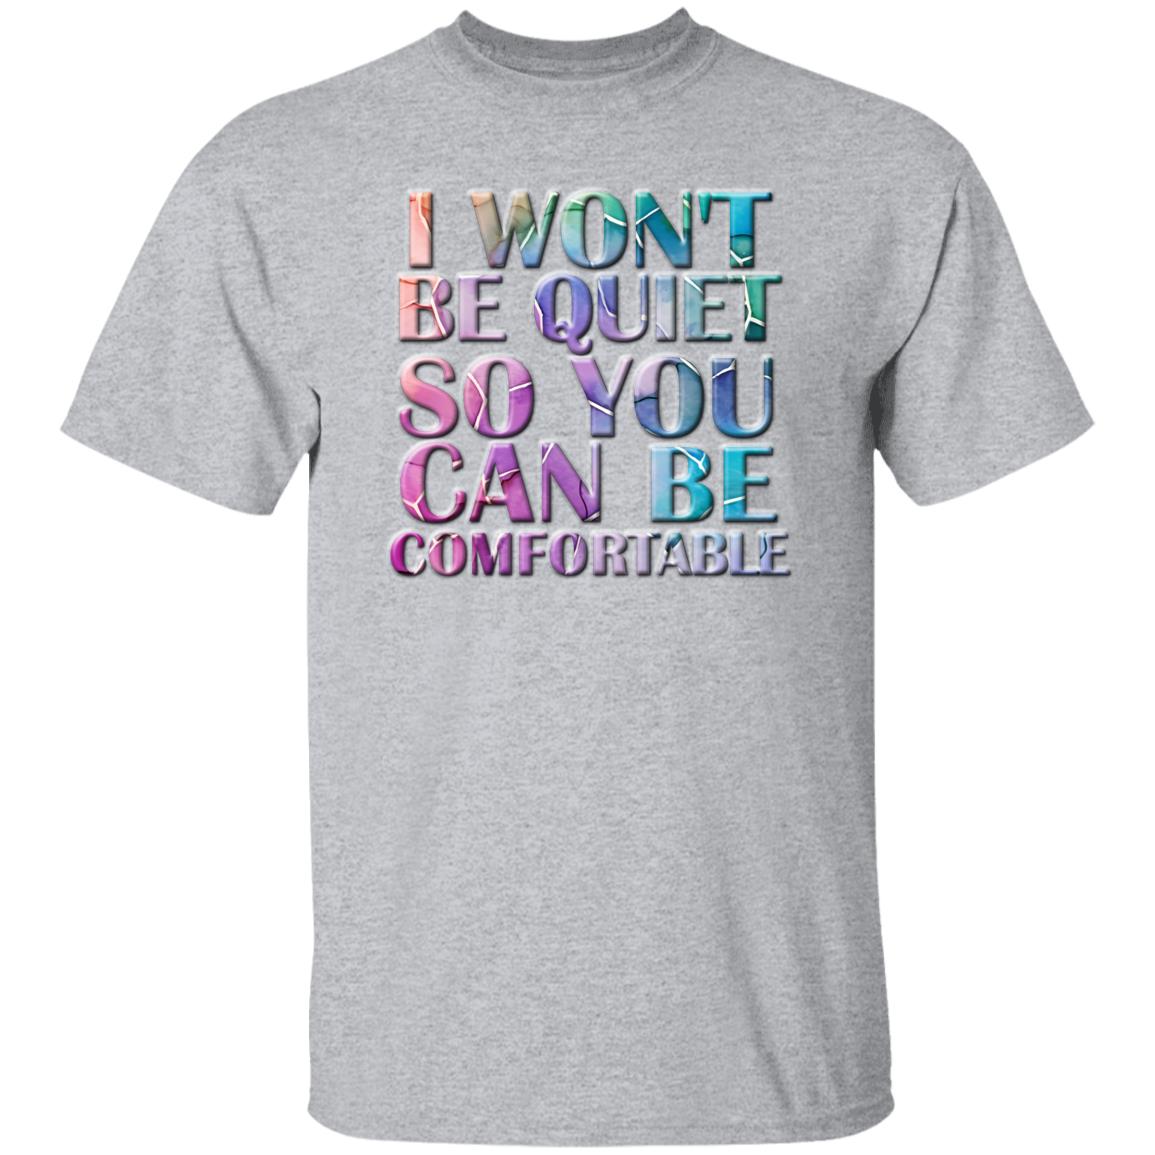 I won't be quiet so you can be comfortable T-Shirt